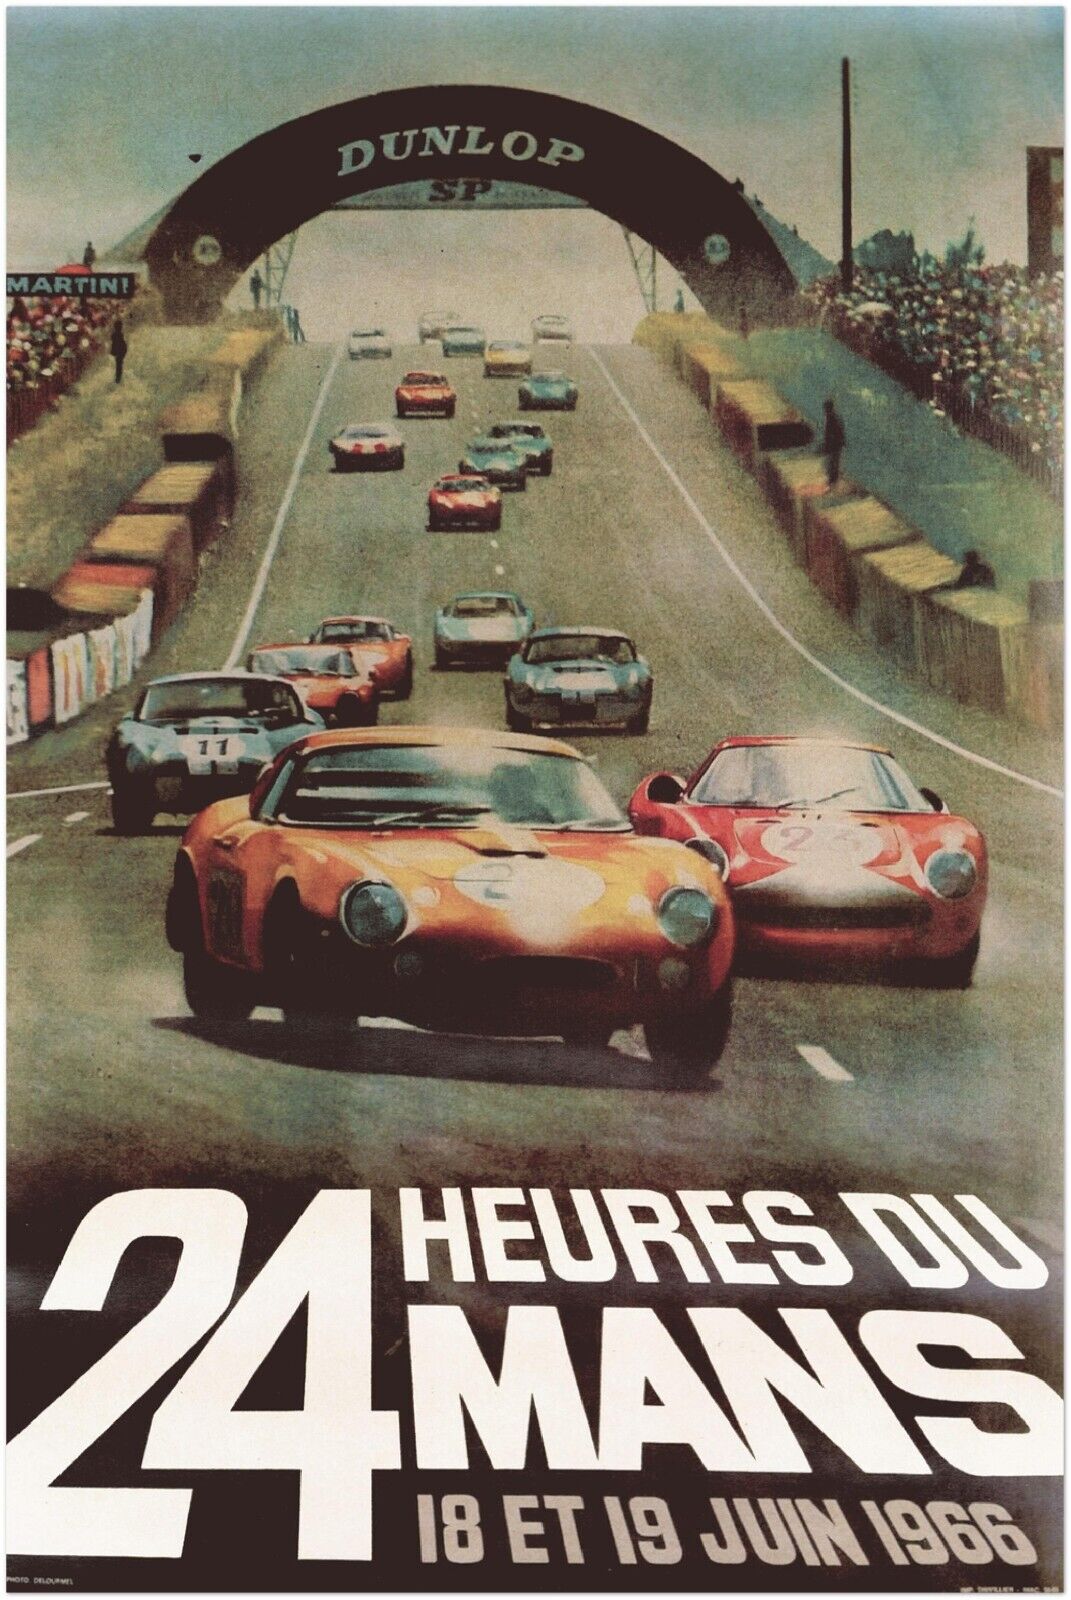 Vintage Racing Travel Poster - Le Mans 24 Heures 1966 - Racing Auto Posters